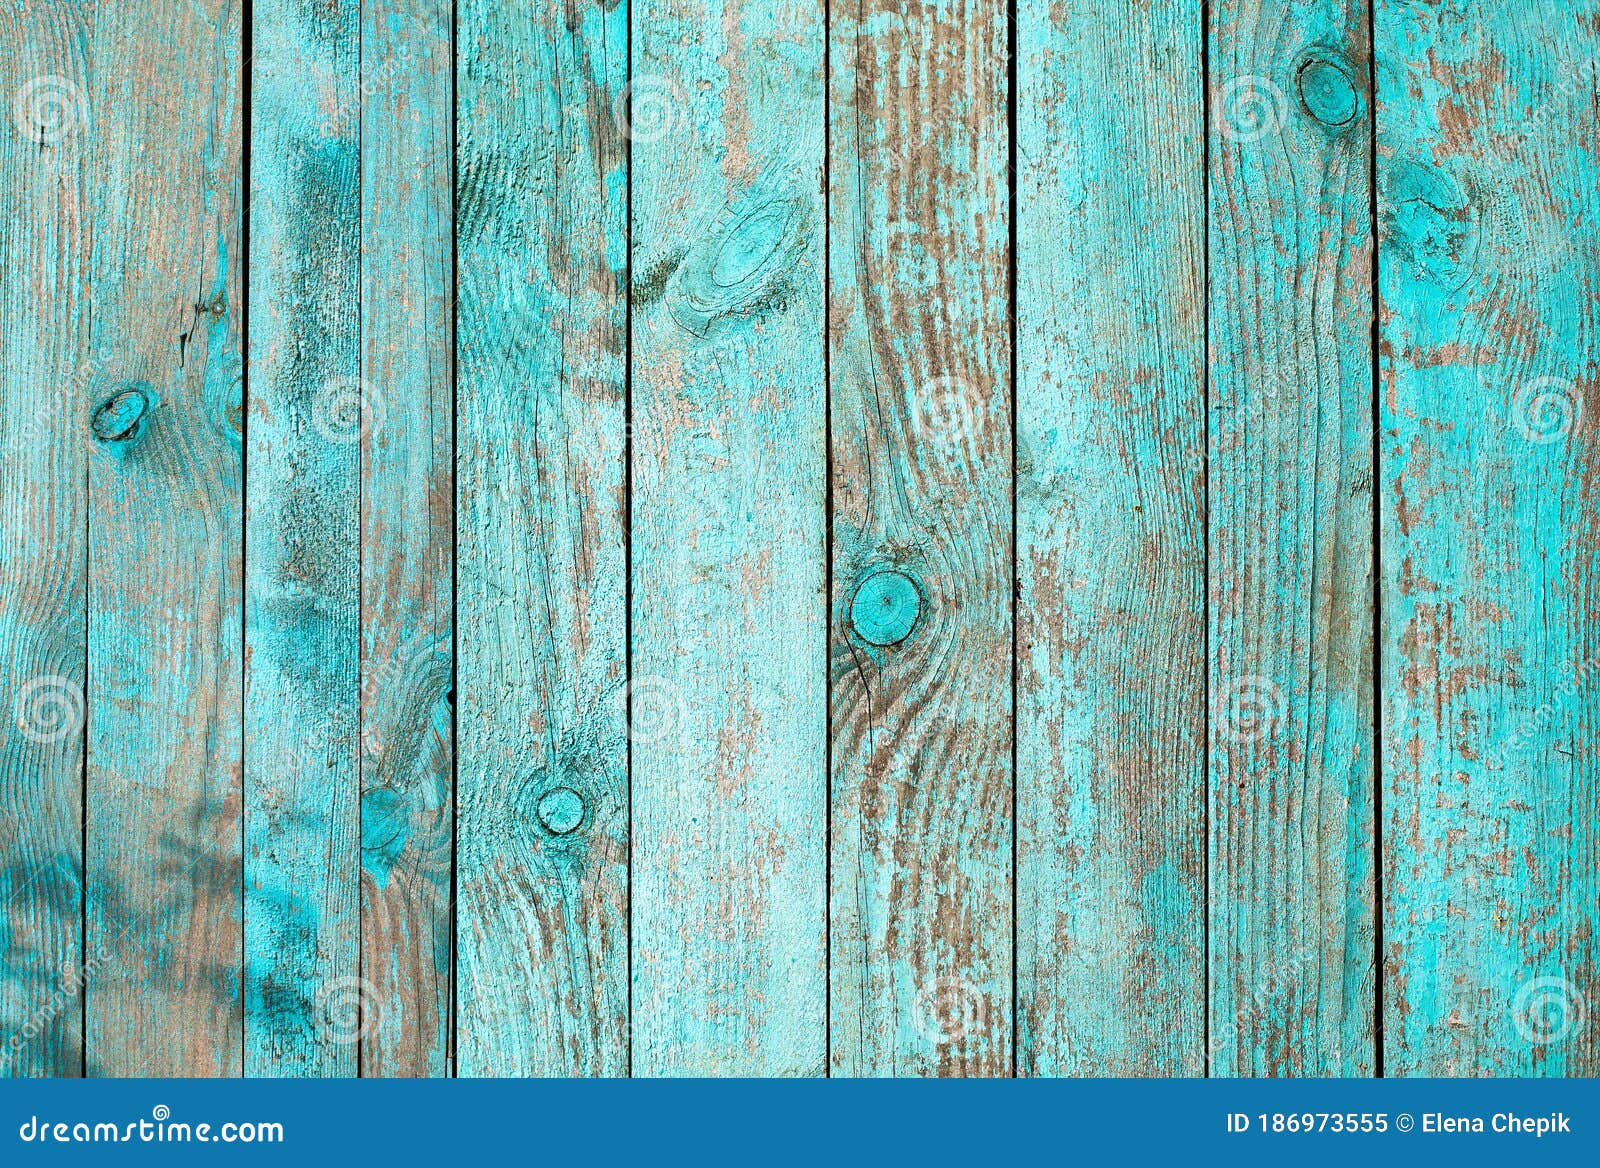 Weathered Blue Wooden Background Texture. Shabby Wood Teal or ...